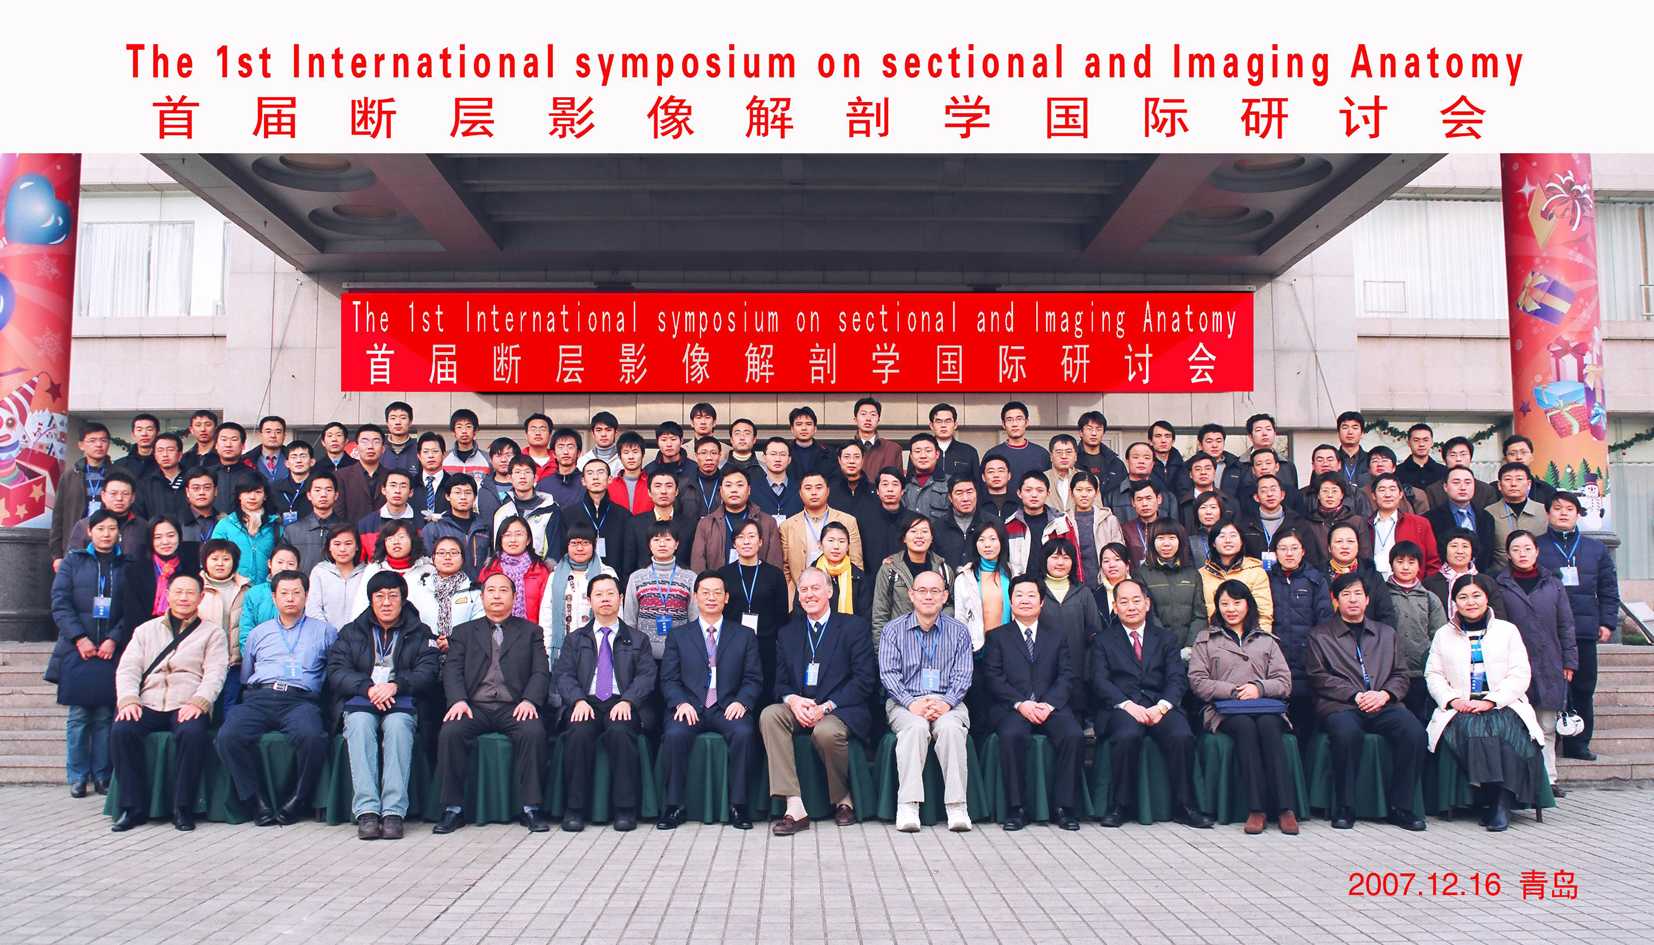 The 1st international symposium on sectional and imaging anatomy